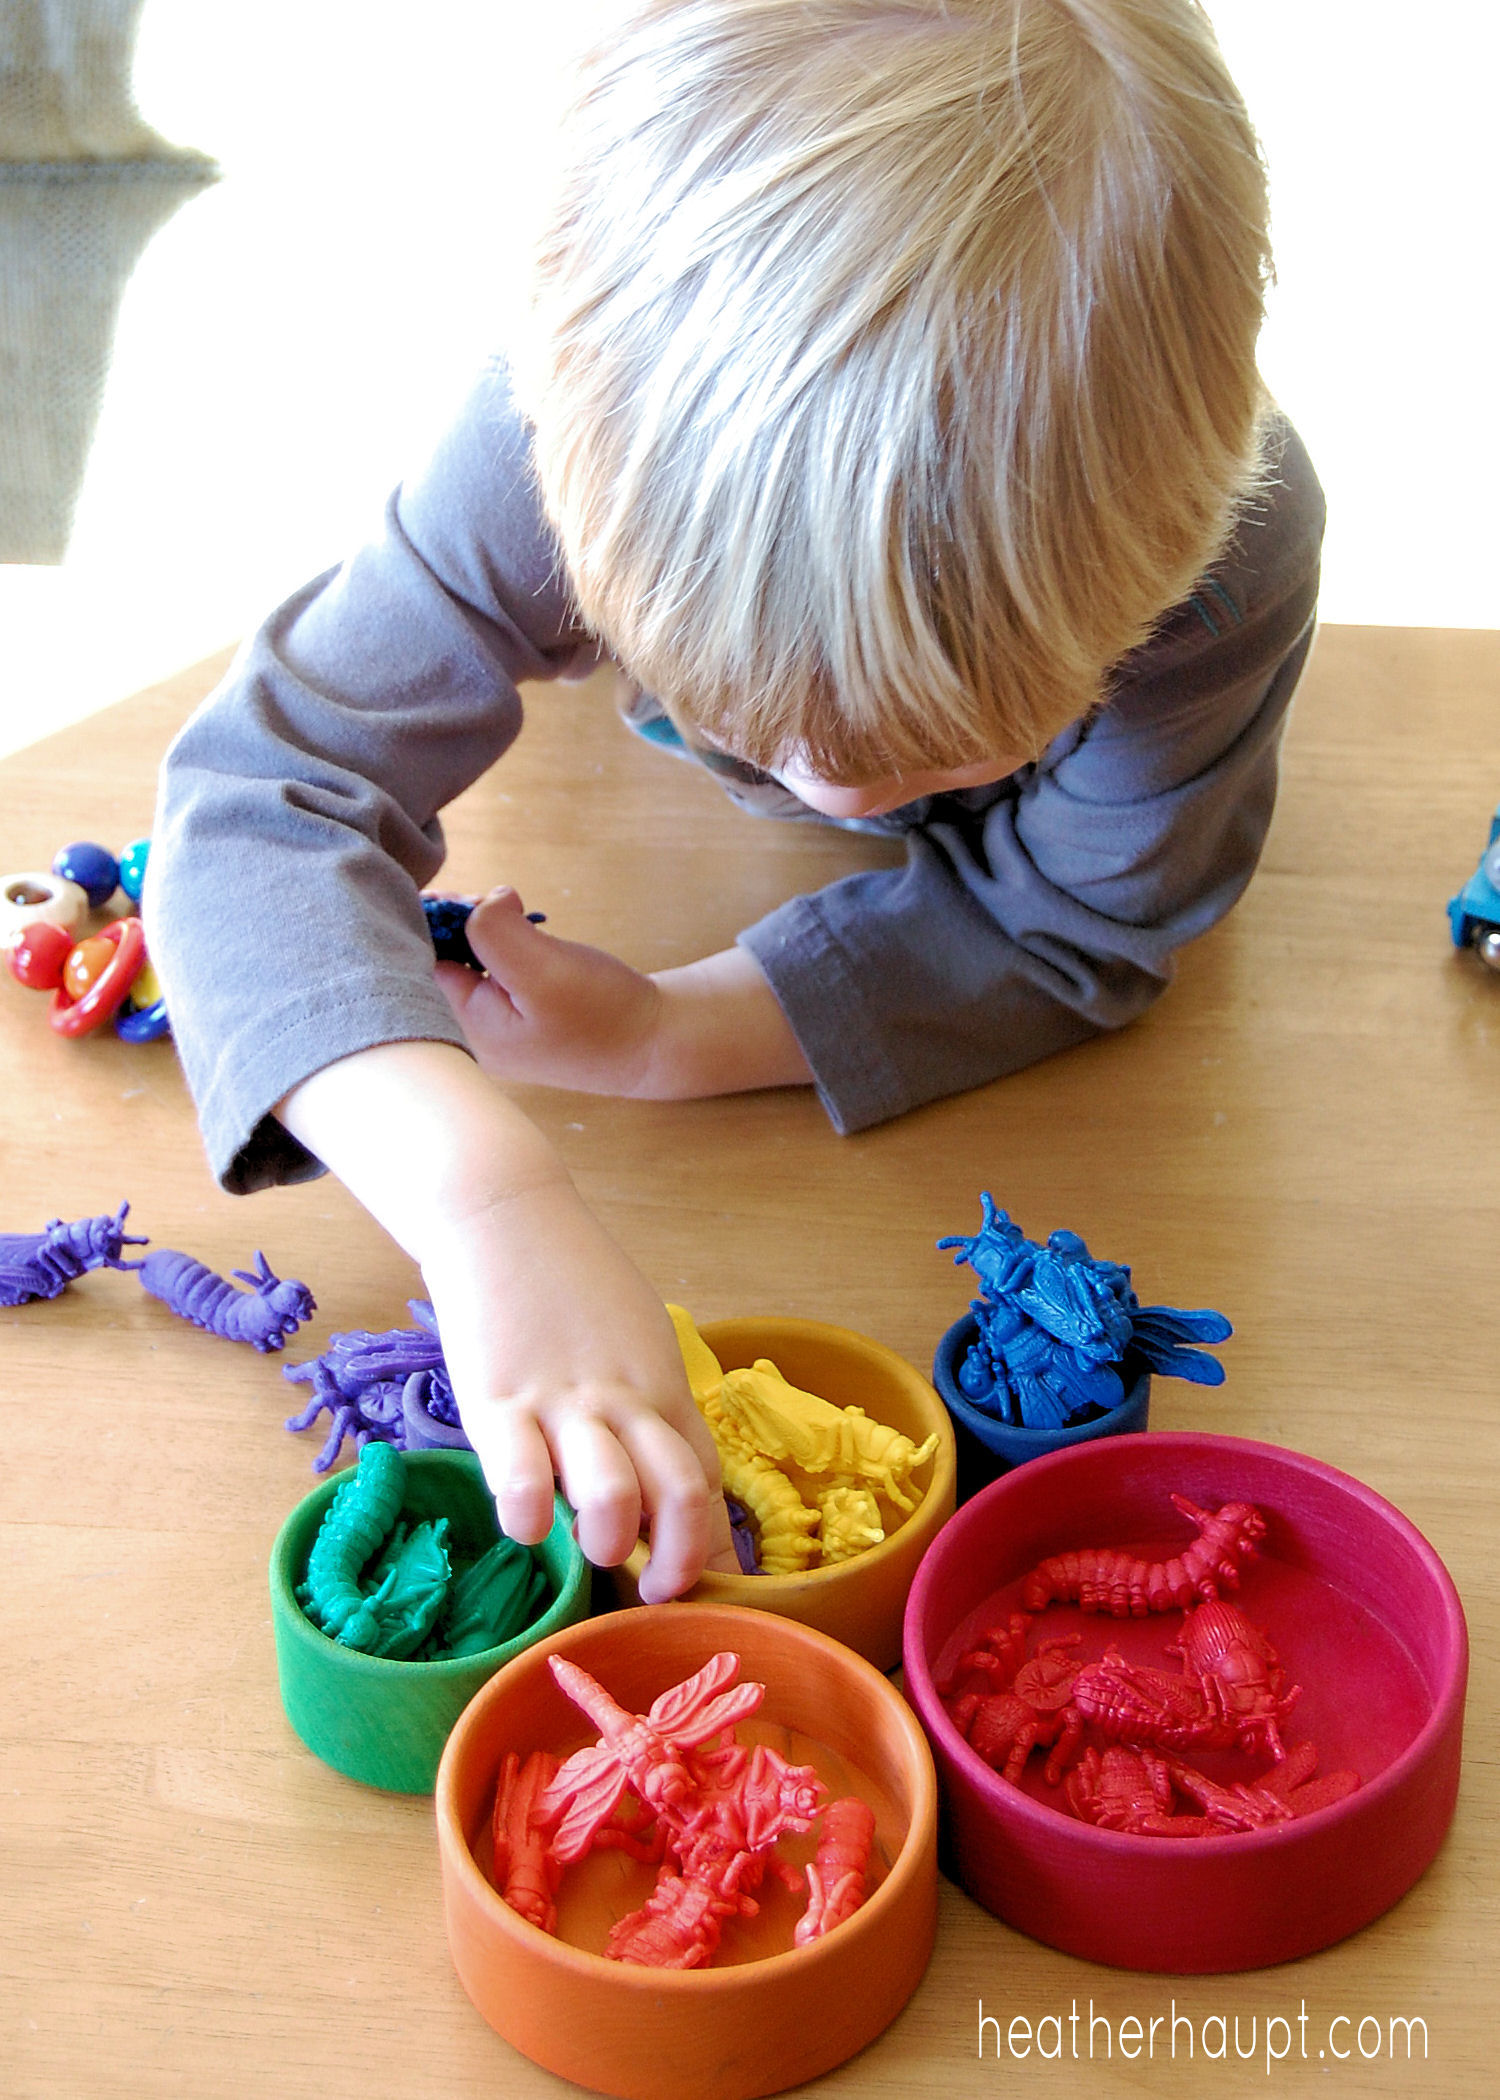 Beautiful wooden bowls and colored bugs are the perfect combo for developing important preschool skills.